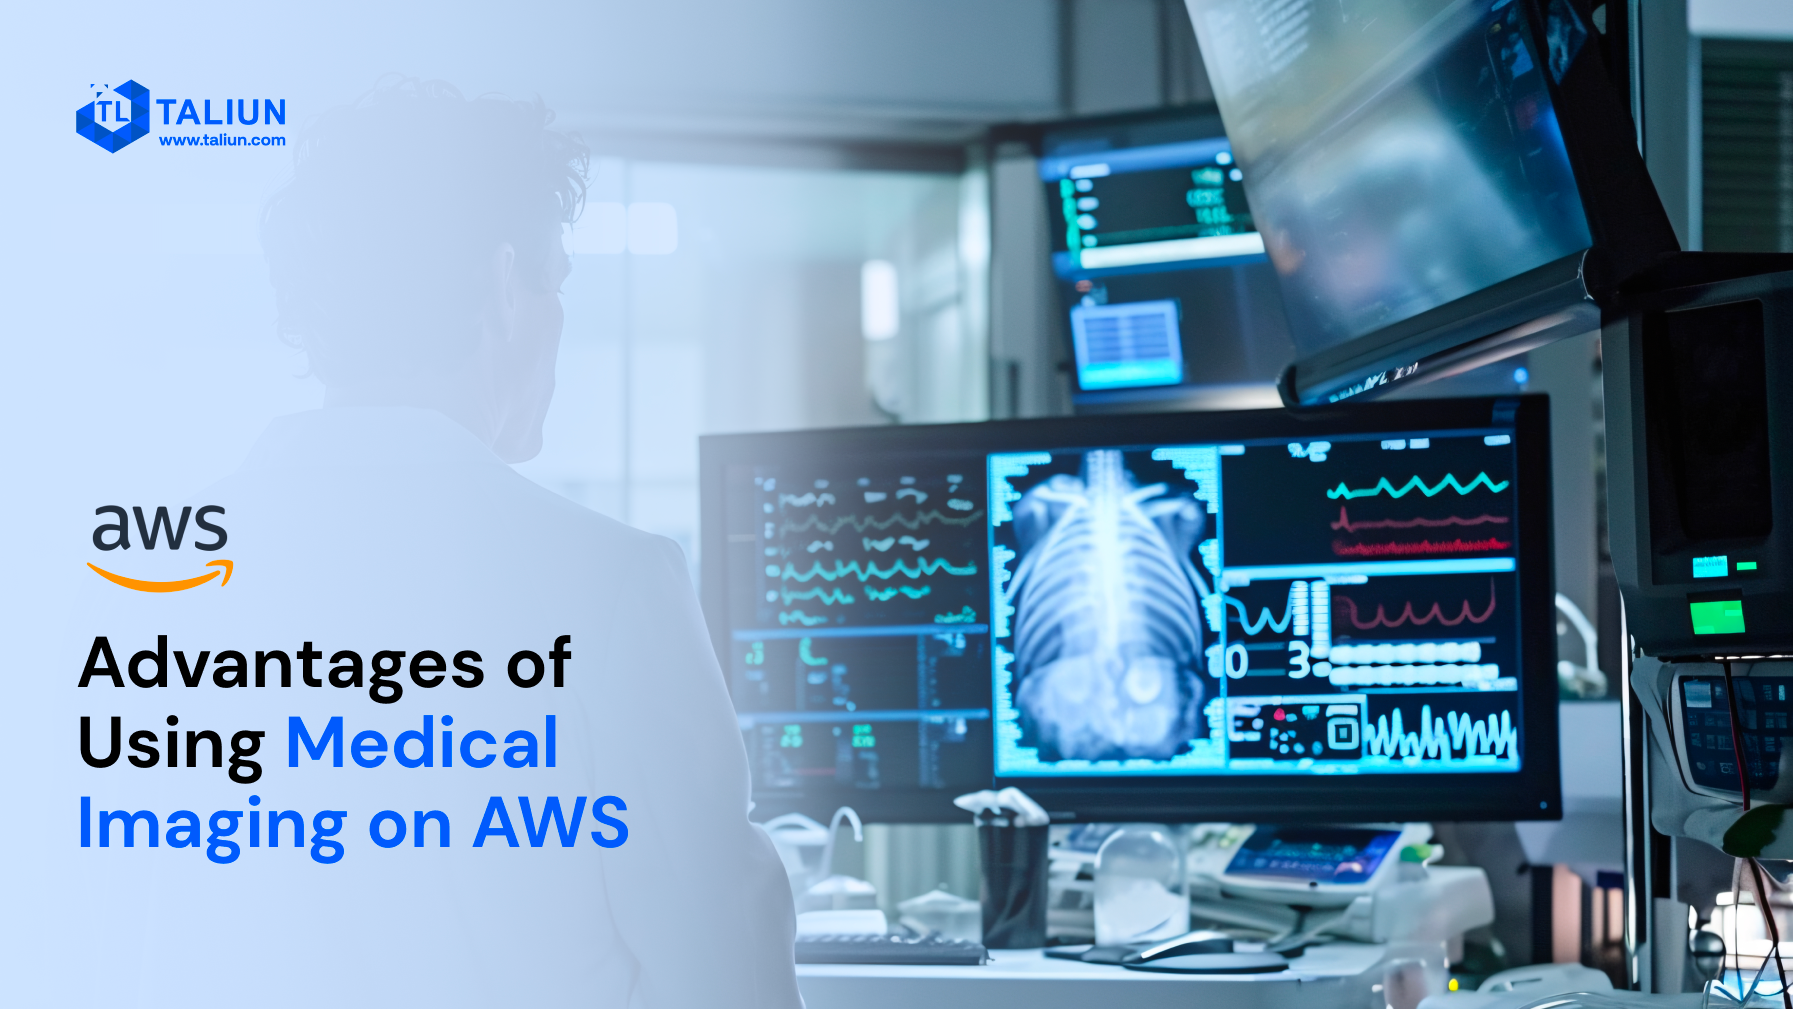 Advantages of Using Medical Imaging on AWS